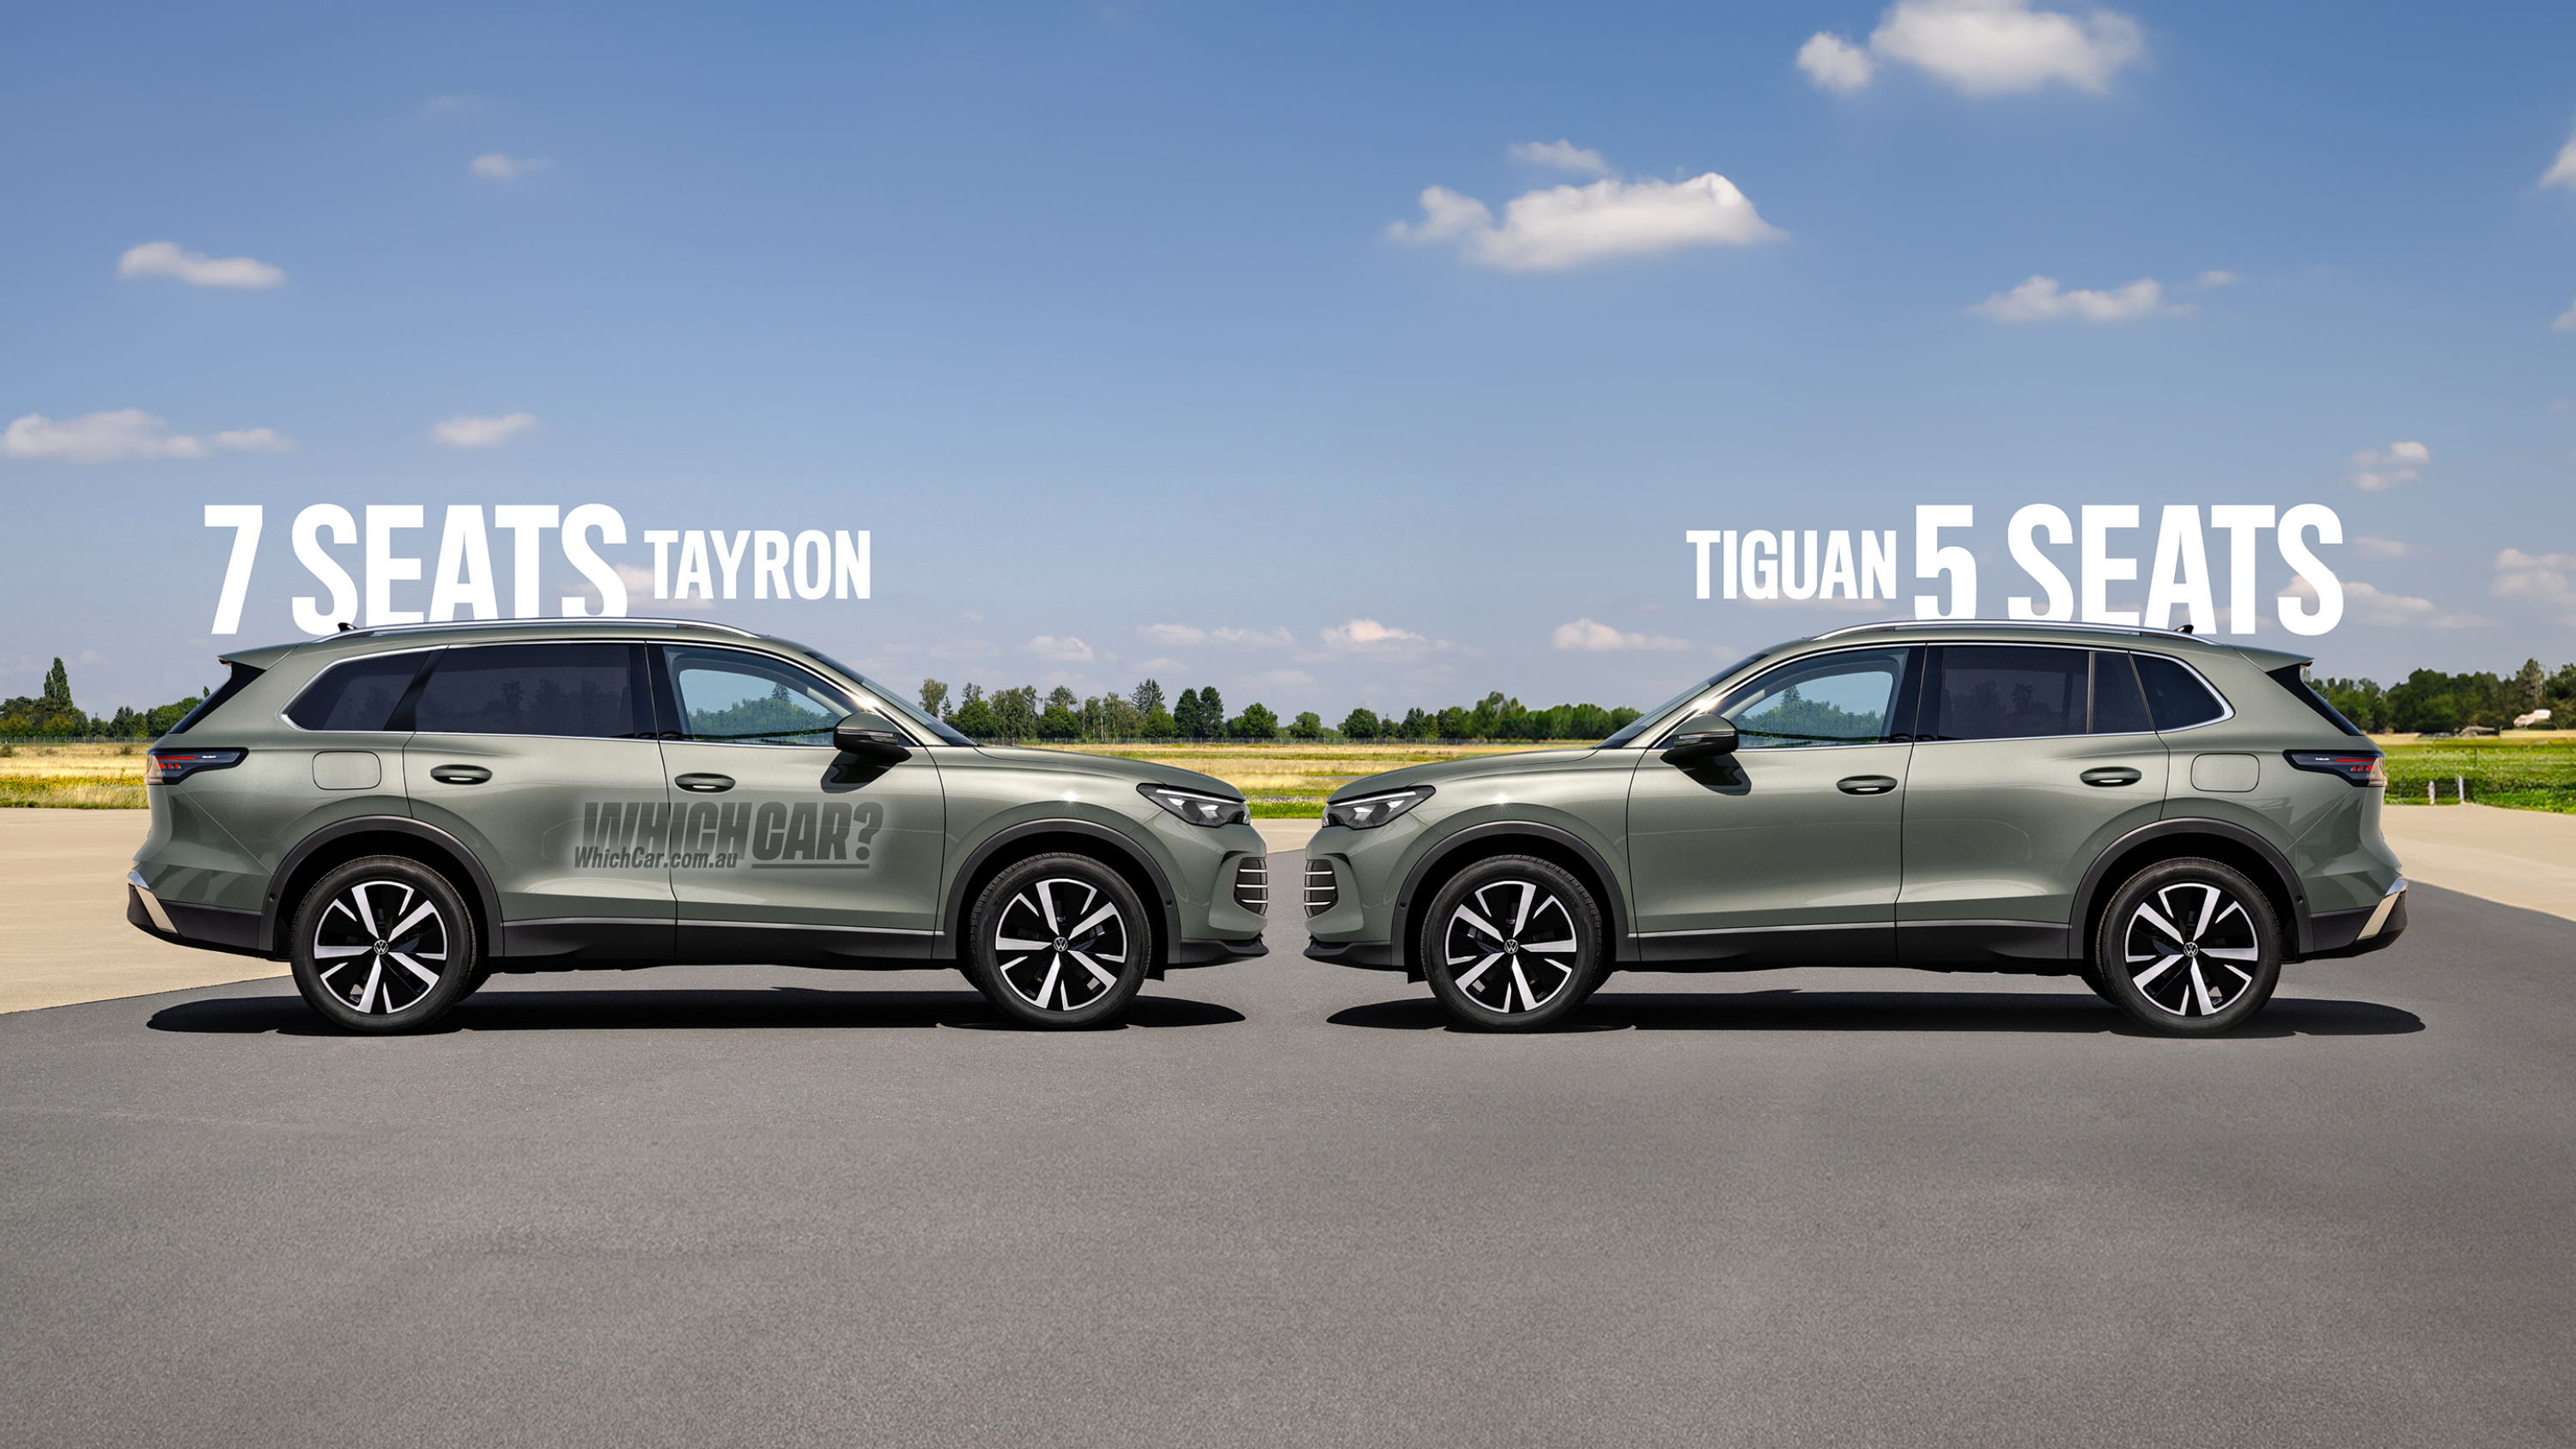 55b81b69/volkswagen tayron imagined whichcar mike stevens png